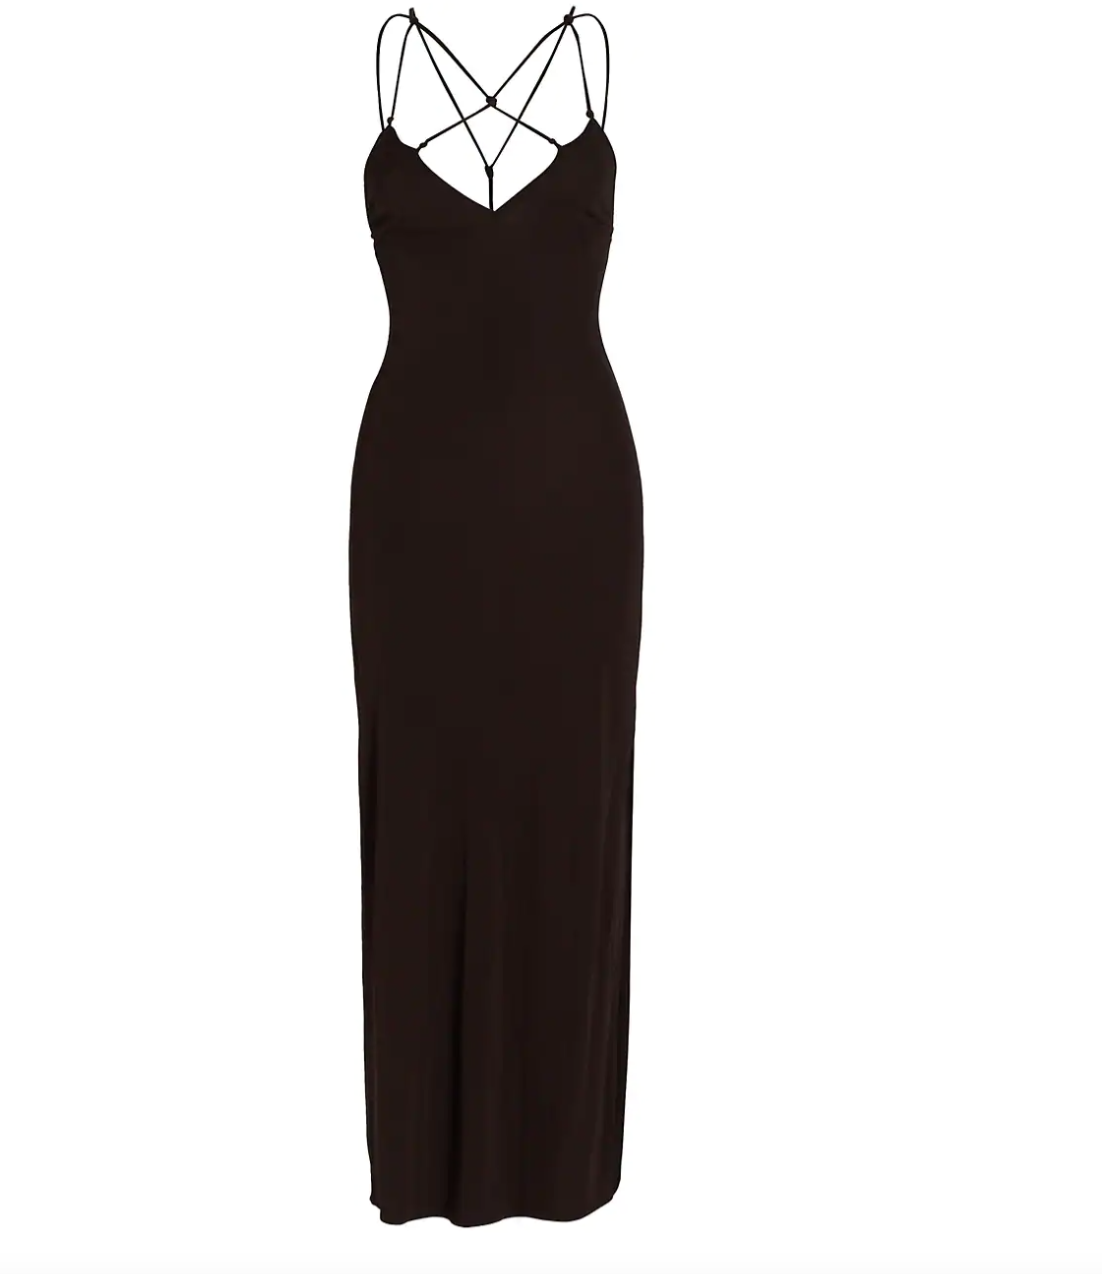 Floor-length black dress with strappy back